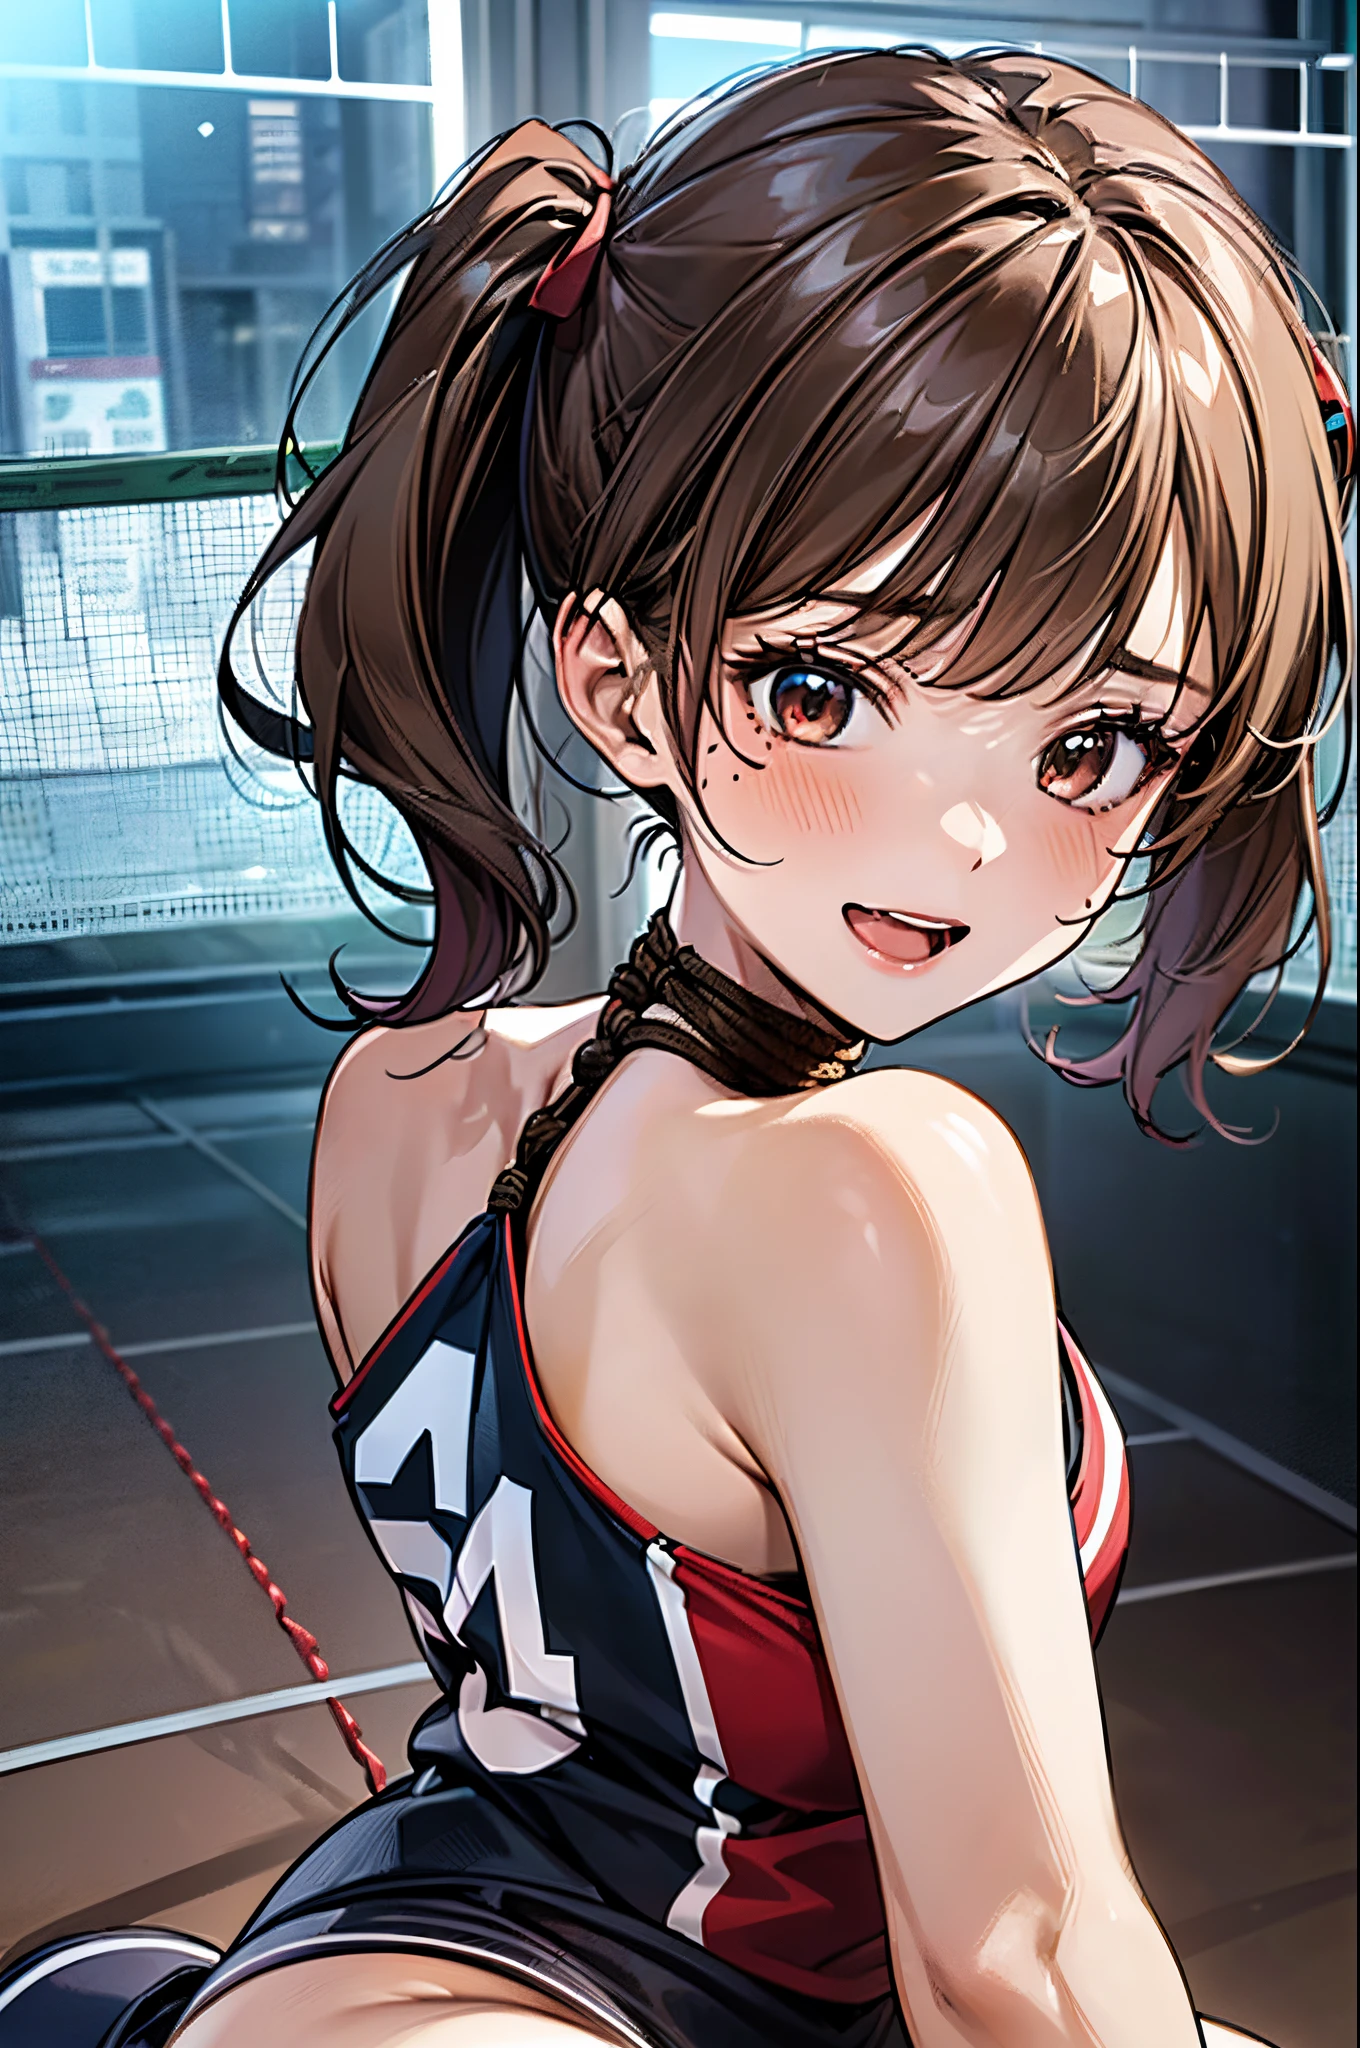 ((((perfect anatomy, anatomically correct, super detailed skin)))), 1 girl, japanese, 16 years old, volleyball player, shiny skin, watching the view, 
beautiful hair, beautiful face, beautiful detailed eyes, brown eyes, (short hair:1.4, twintails:1.7), babyface, mole under eye, 
beautiful collarbones, beautiful body, beautiful breasts, beautiful thighs, beautiful legs, large breasts:0.5, seductive thighs, cameltoe, bare arms, bare hands, bottomless, break, 
((symmetrical clothinetallic)), (((buruma), sleeveless volleyball uniform)), break, 
(((((brown rope)), shibari:1.5, (shibari over clothes)))), ((arms behind back:1.5), breasts bondage, arms bondage, legs bondage), (((toys in panties))), 
((ashamed, open mouth)), ((kneeling, spread legs)), break, 
(beautiful scenery), evening, day, ((volleyball gymnasium, volleyball cort)), 
(8k, top-quality, masterpiece​:1.2, extremely detailed), (photorealistic:1.2), beautiful illustration, cinematic lighting,